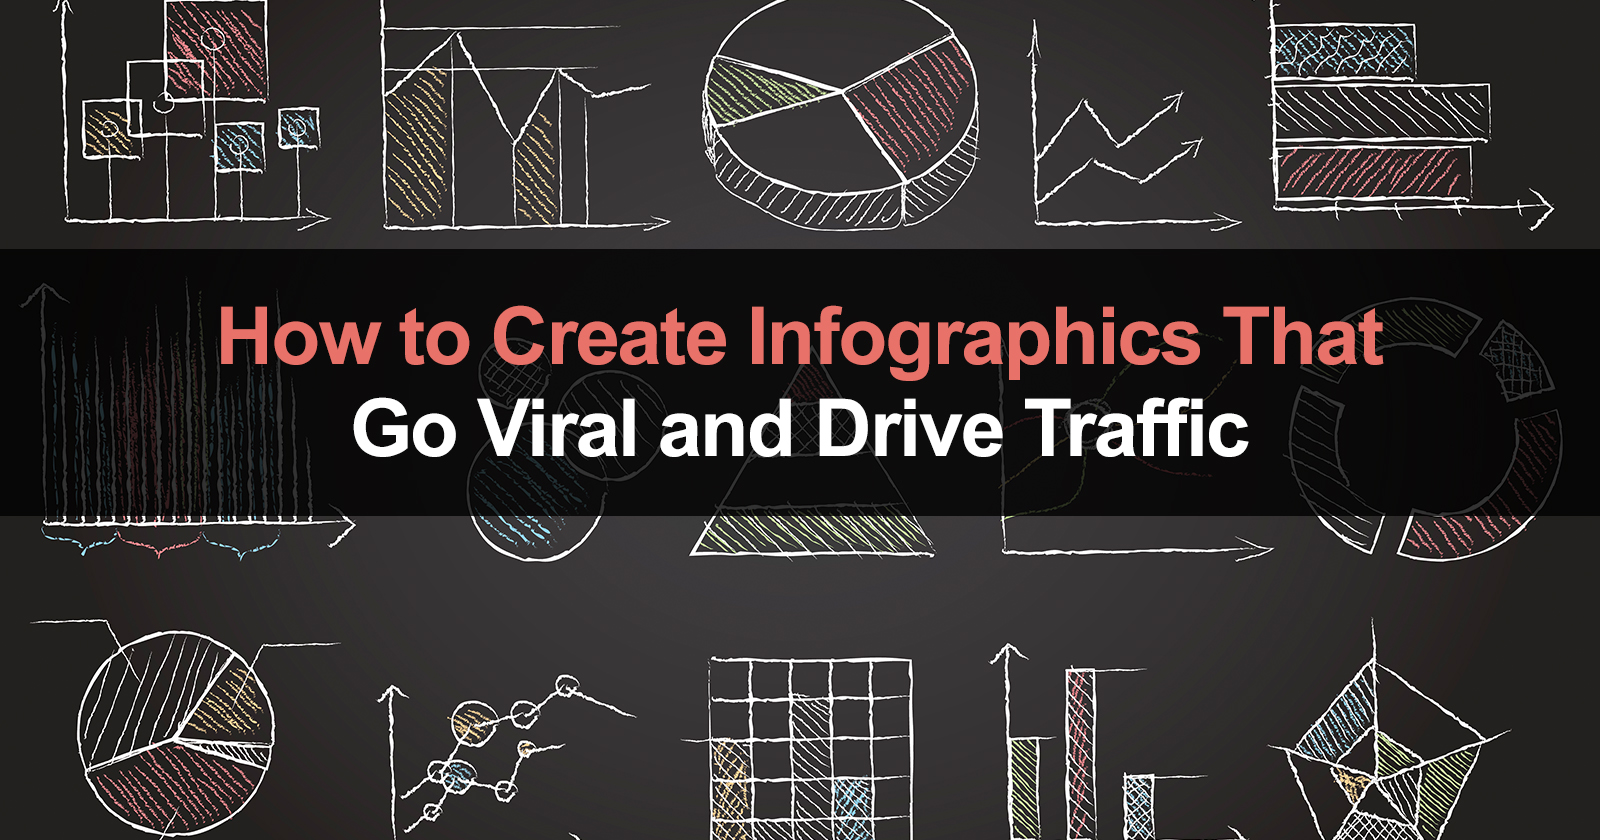 how-to-create-infographics-that-go-viral-and-drive-traffic-jason